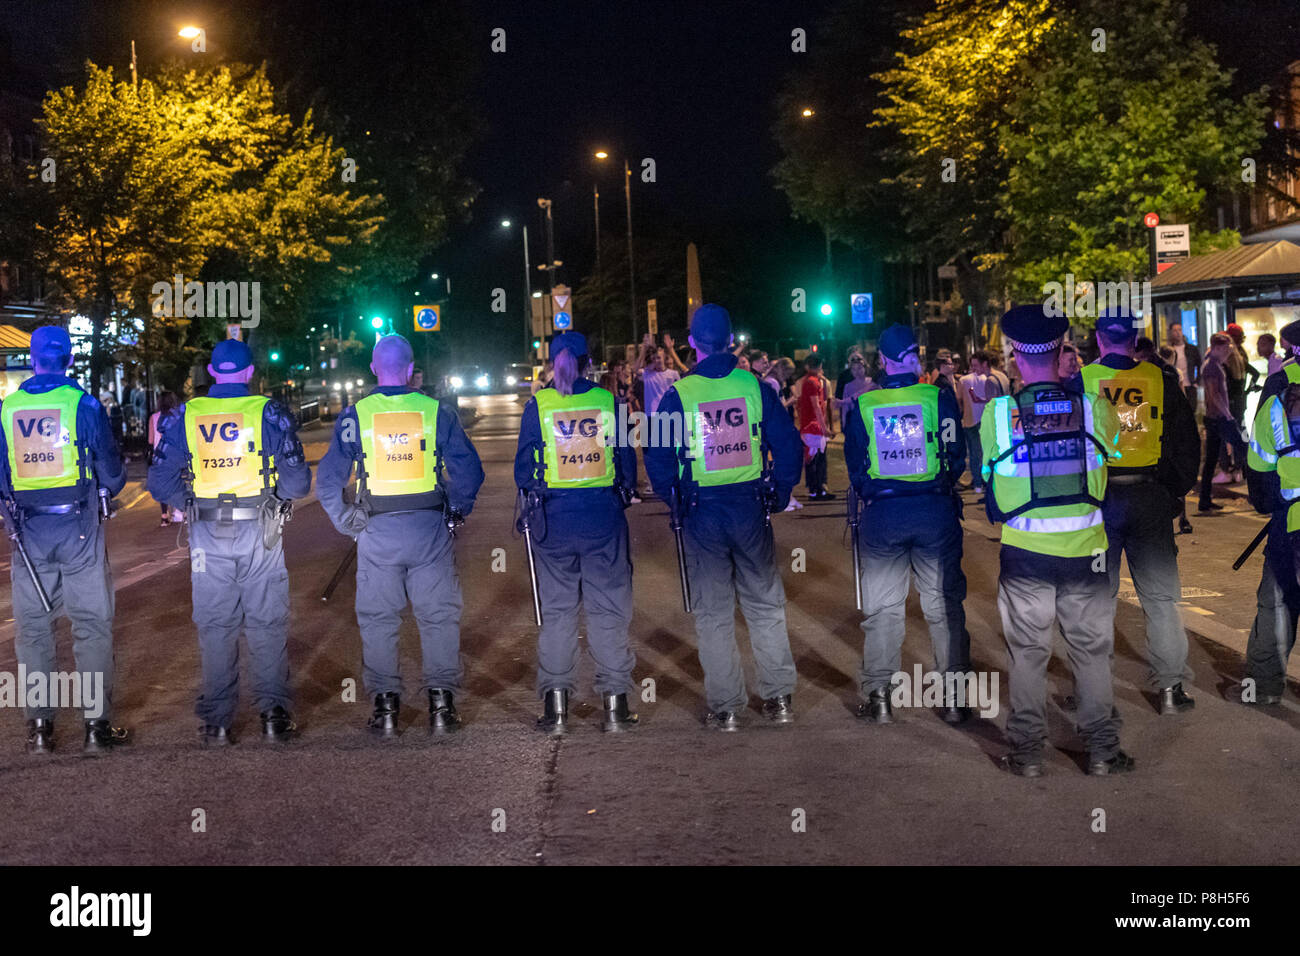 Brentwood Essex 11th June 2018 Approximately fifty police officers deployed in Brentwood Essex  following England losing against Croatia.  Fans tears turned to disorder and Essex police had to clear fans down the entire length of the High Street.  One small group of fans challenged the police and arrests were made. Credit Ian Davidson/Alamy Live News Stock Photo